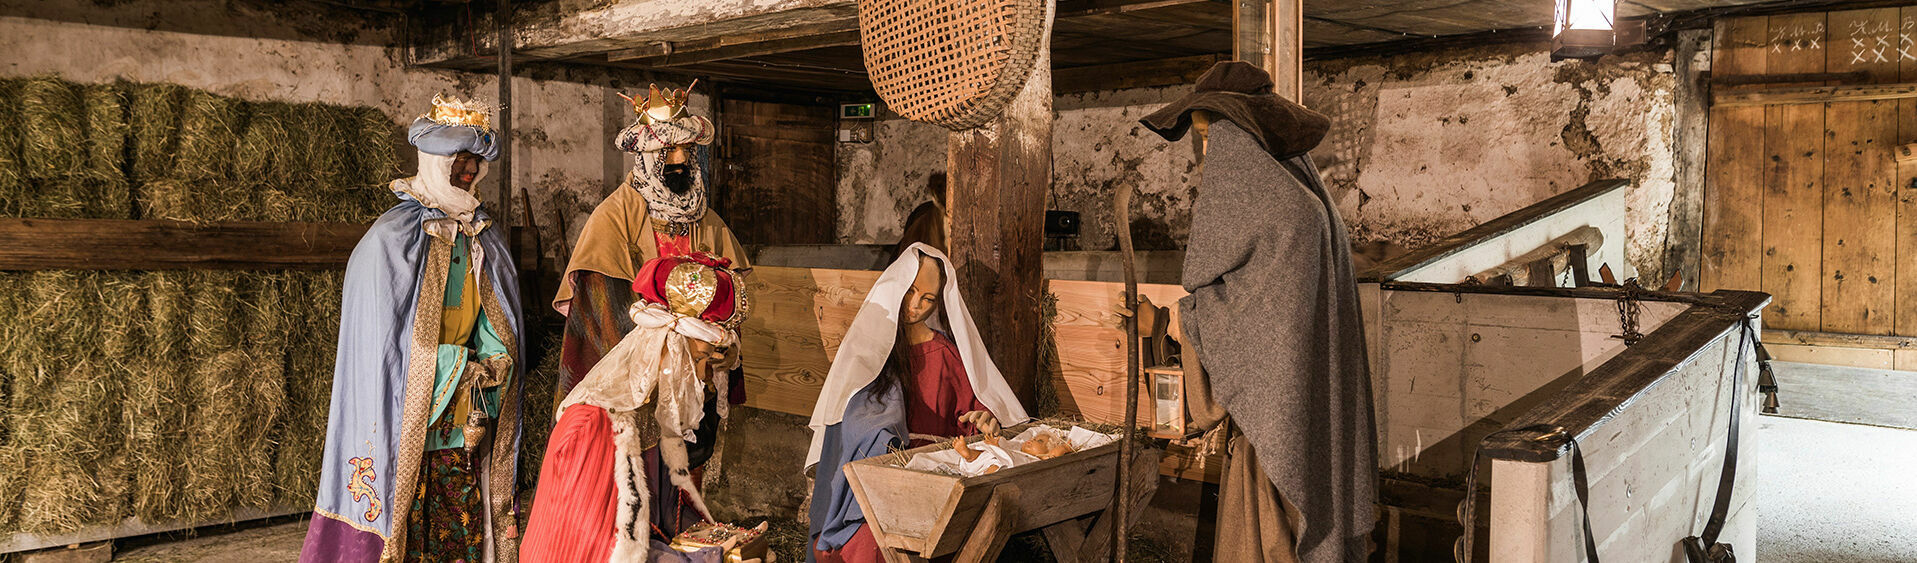 Each year, the local history museum Sixenhof plays host to the Tirolean Mountain Christmas with a live-size nativity scene and live animals.